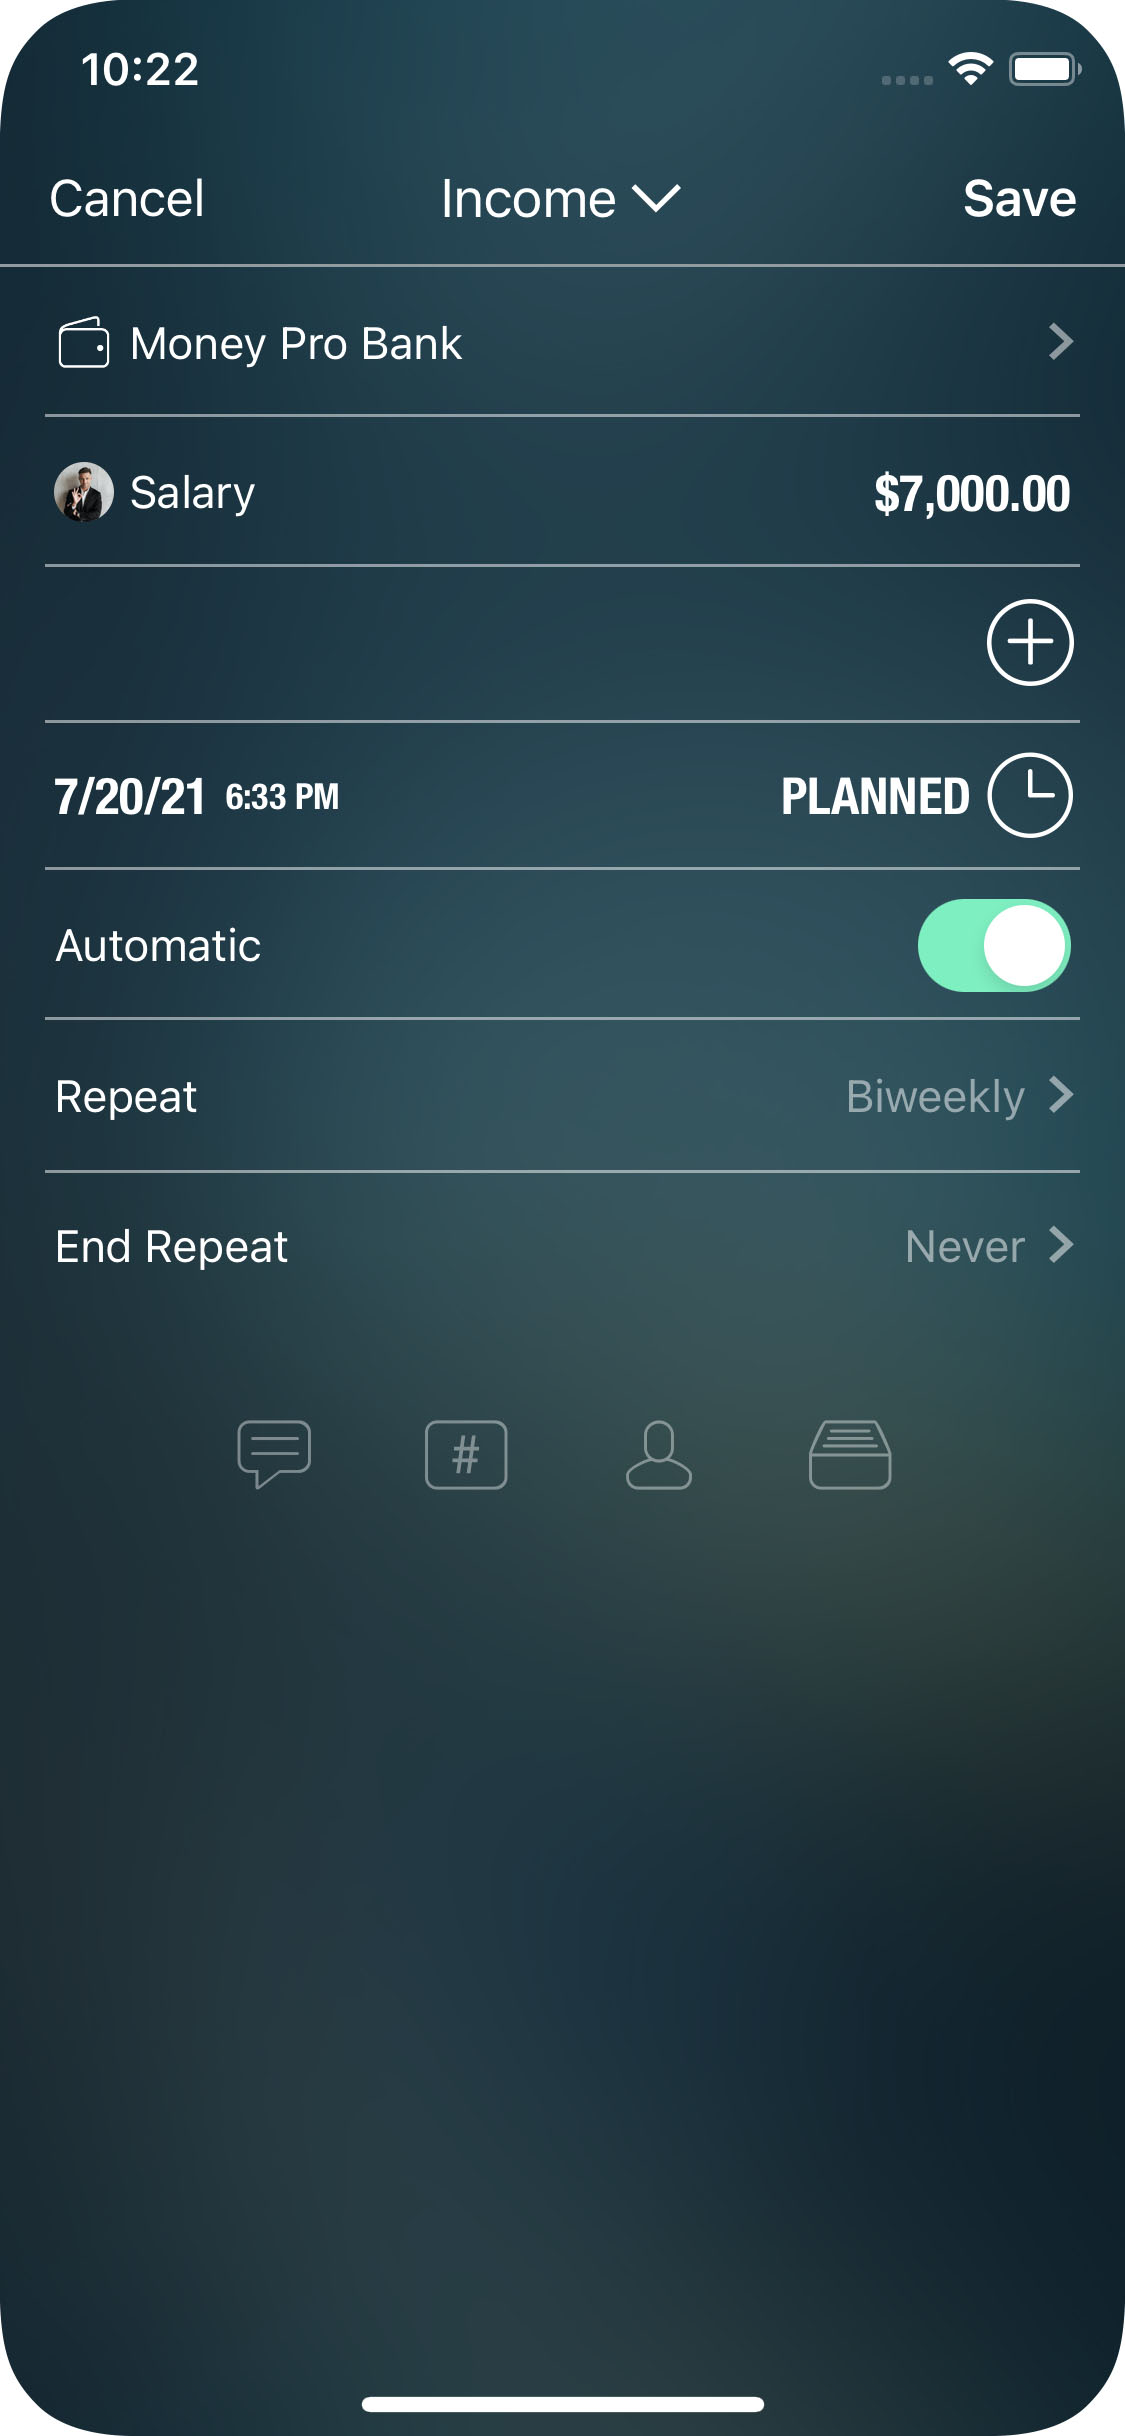 Money Pro - Planned and recurring bills - iPhone